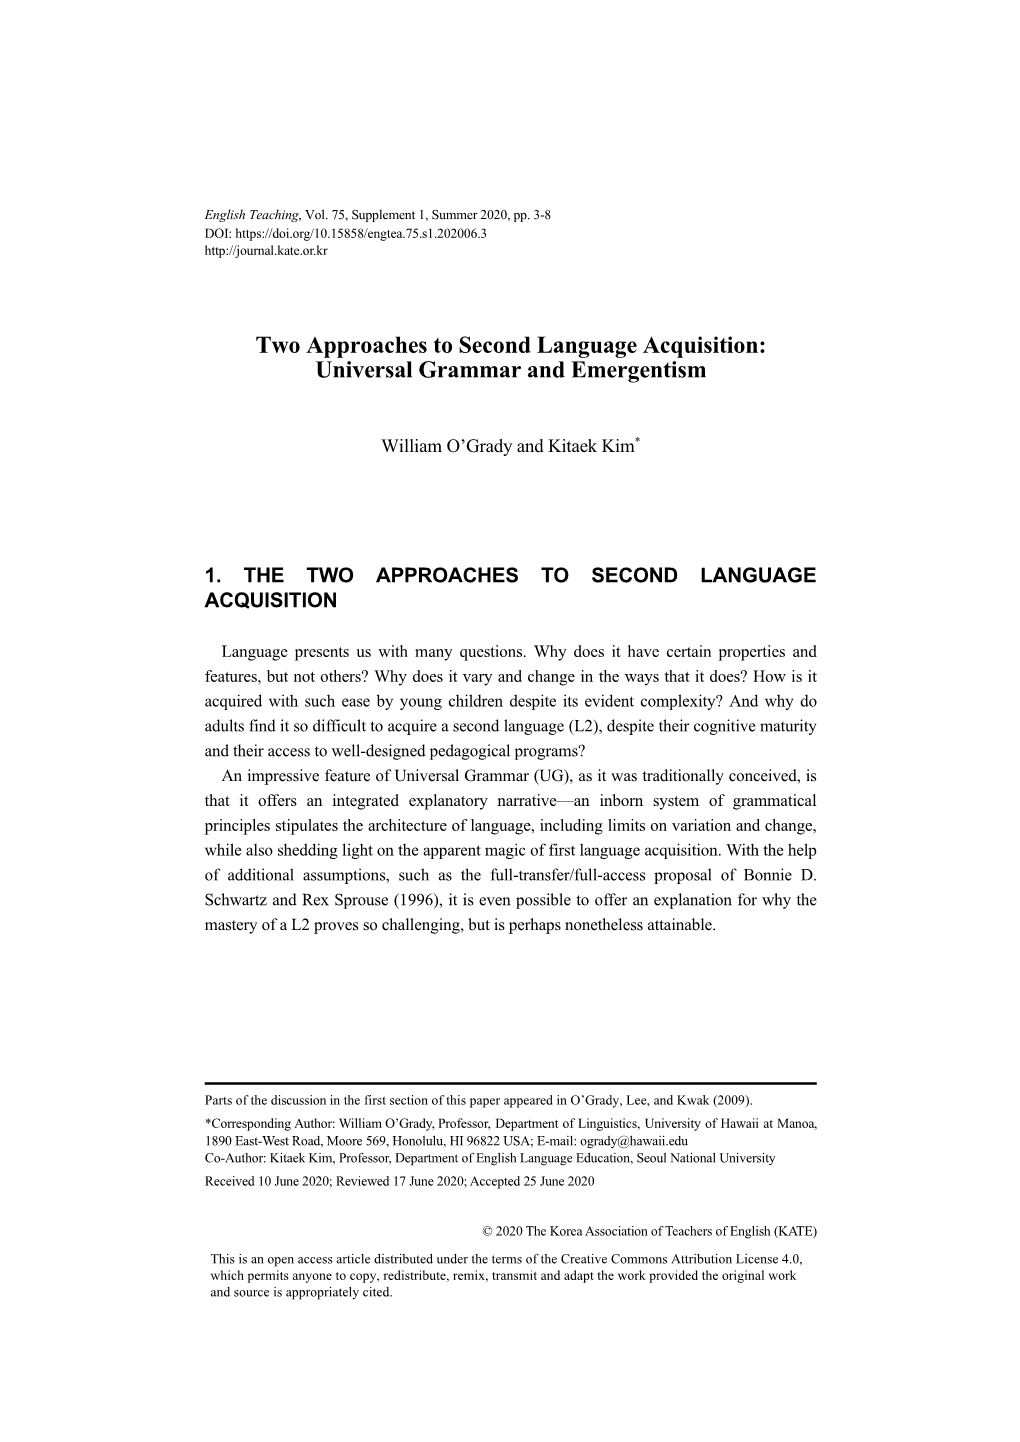 Two Approaches to Second Language Acquisition: Universal Grammar and Emergentism